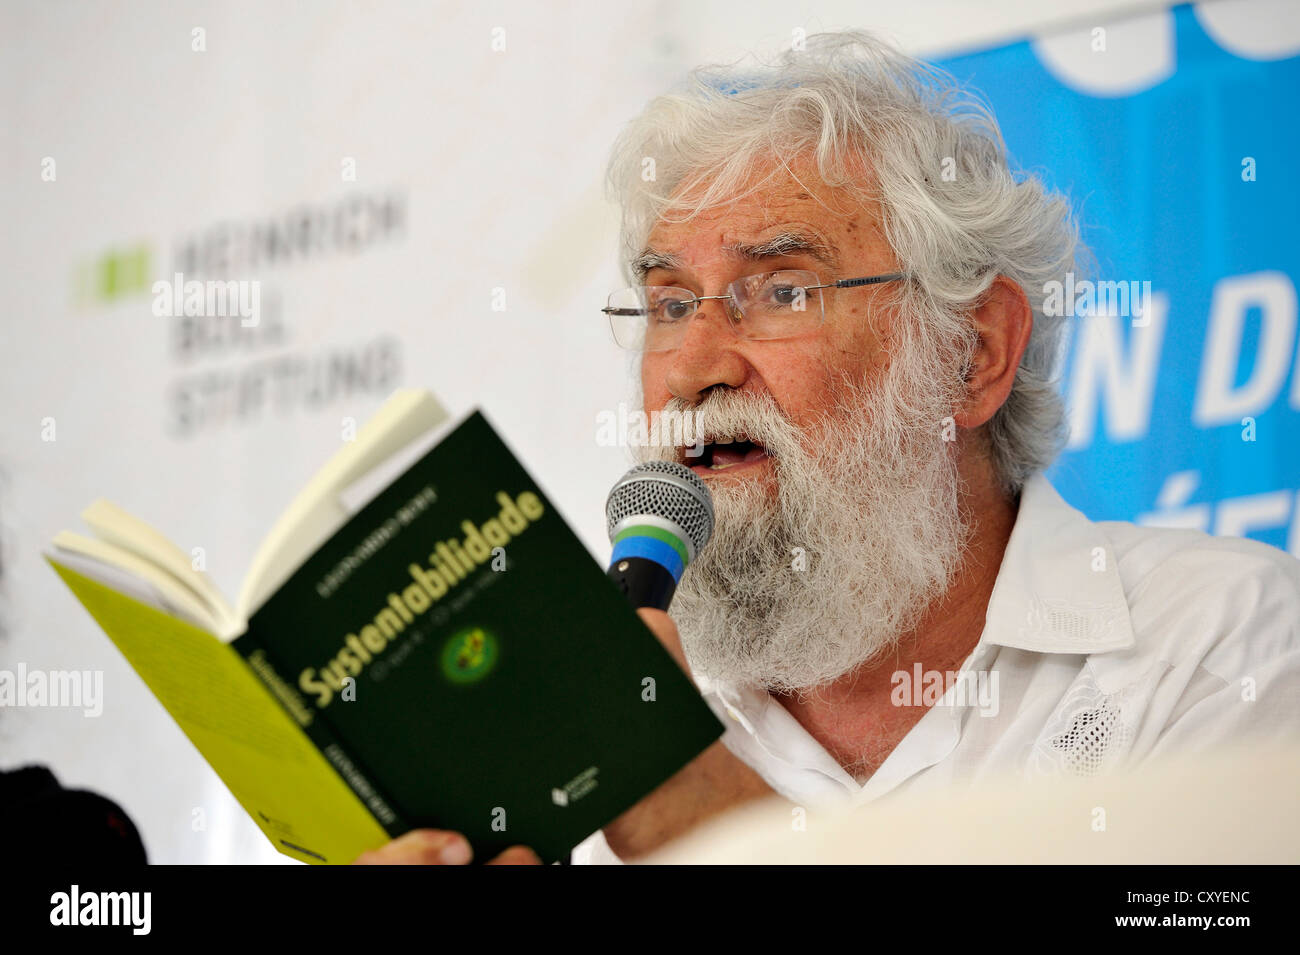 Leonardo Boff, a prominent liberation theologian, reads from his book 'Sustentabilidade', 'sustainability' at a panel Stock Photo